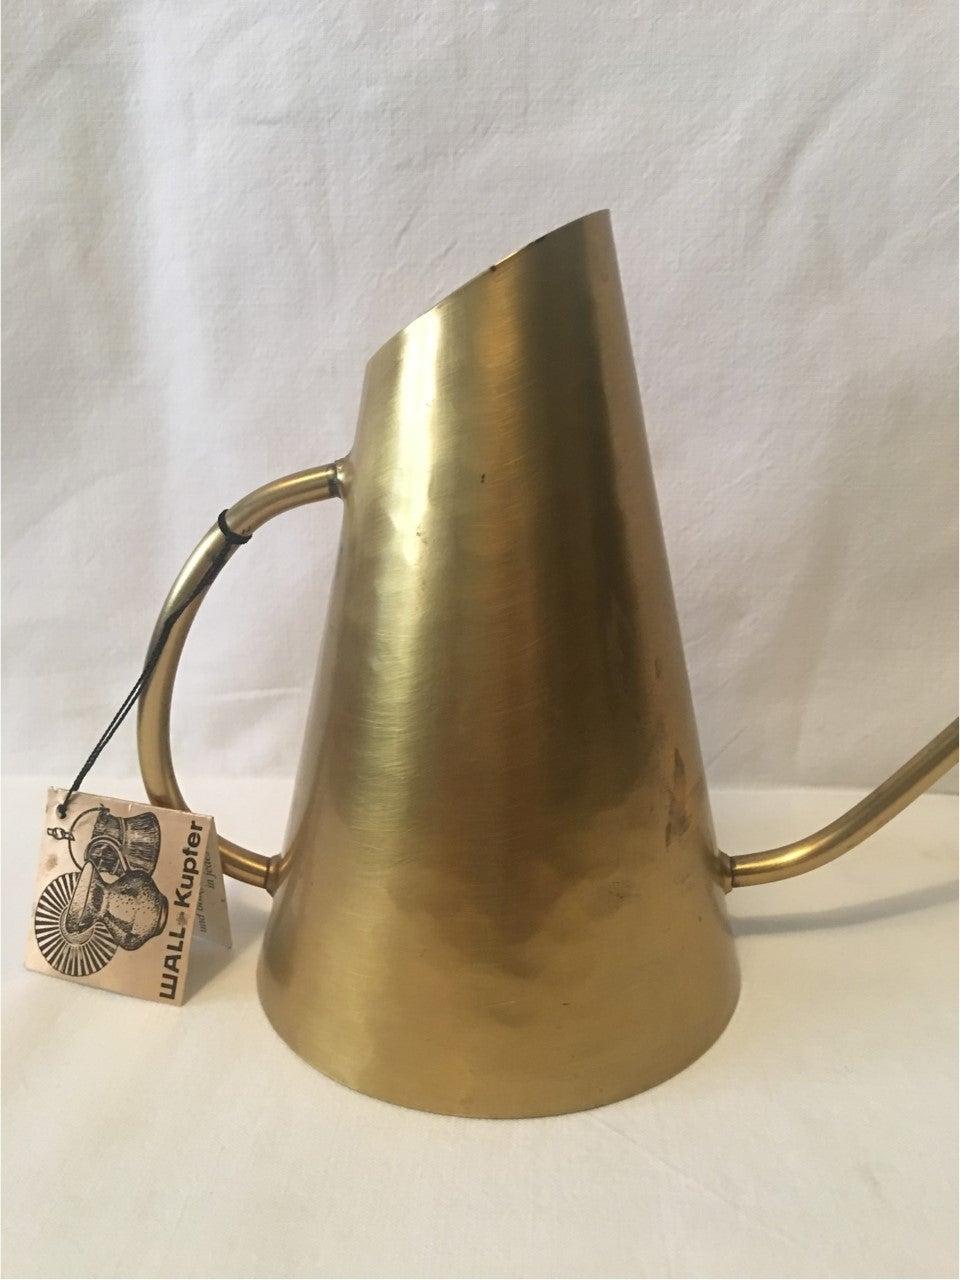 Handmade watering can with long spout from the German Company Wall, Kupfer from the early 1970s. Hold 0.5 liters. Lovely decor and functionality as well.
Handgemachte Wasserkanne mit Langem Ausgießer von der Deutschen firma wall, Kupfer aus den